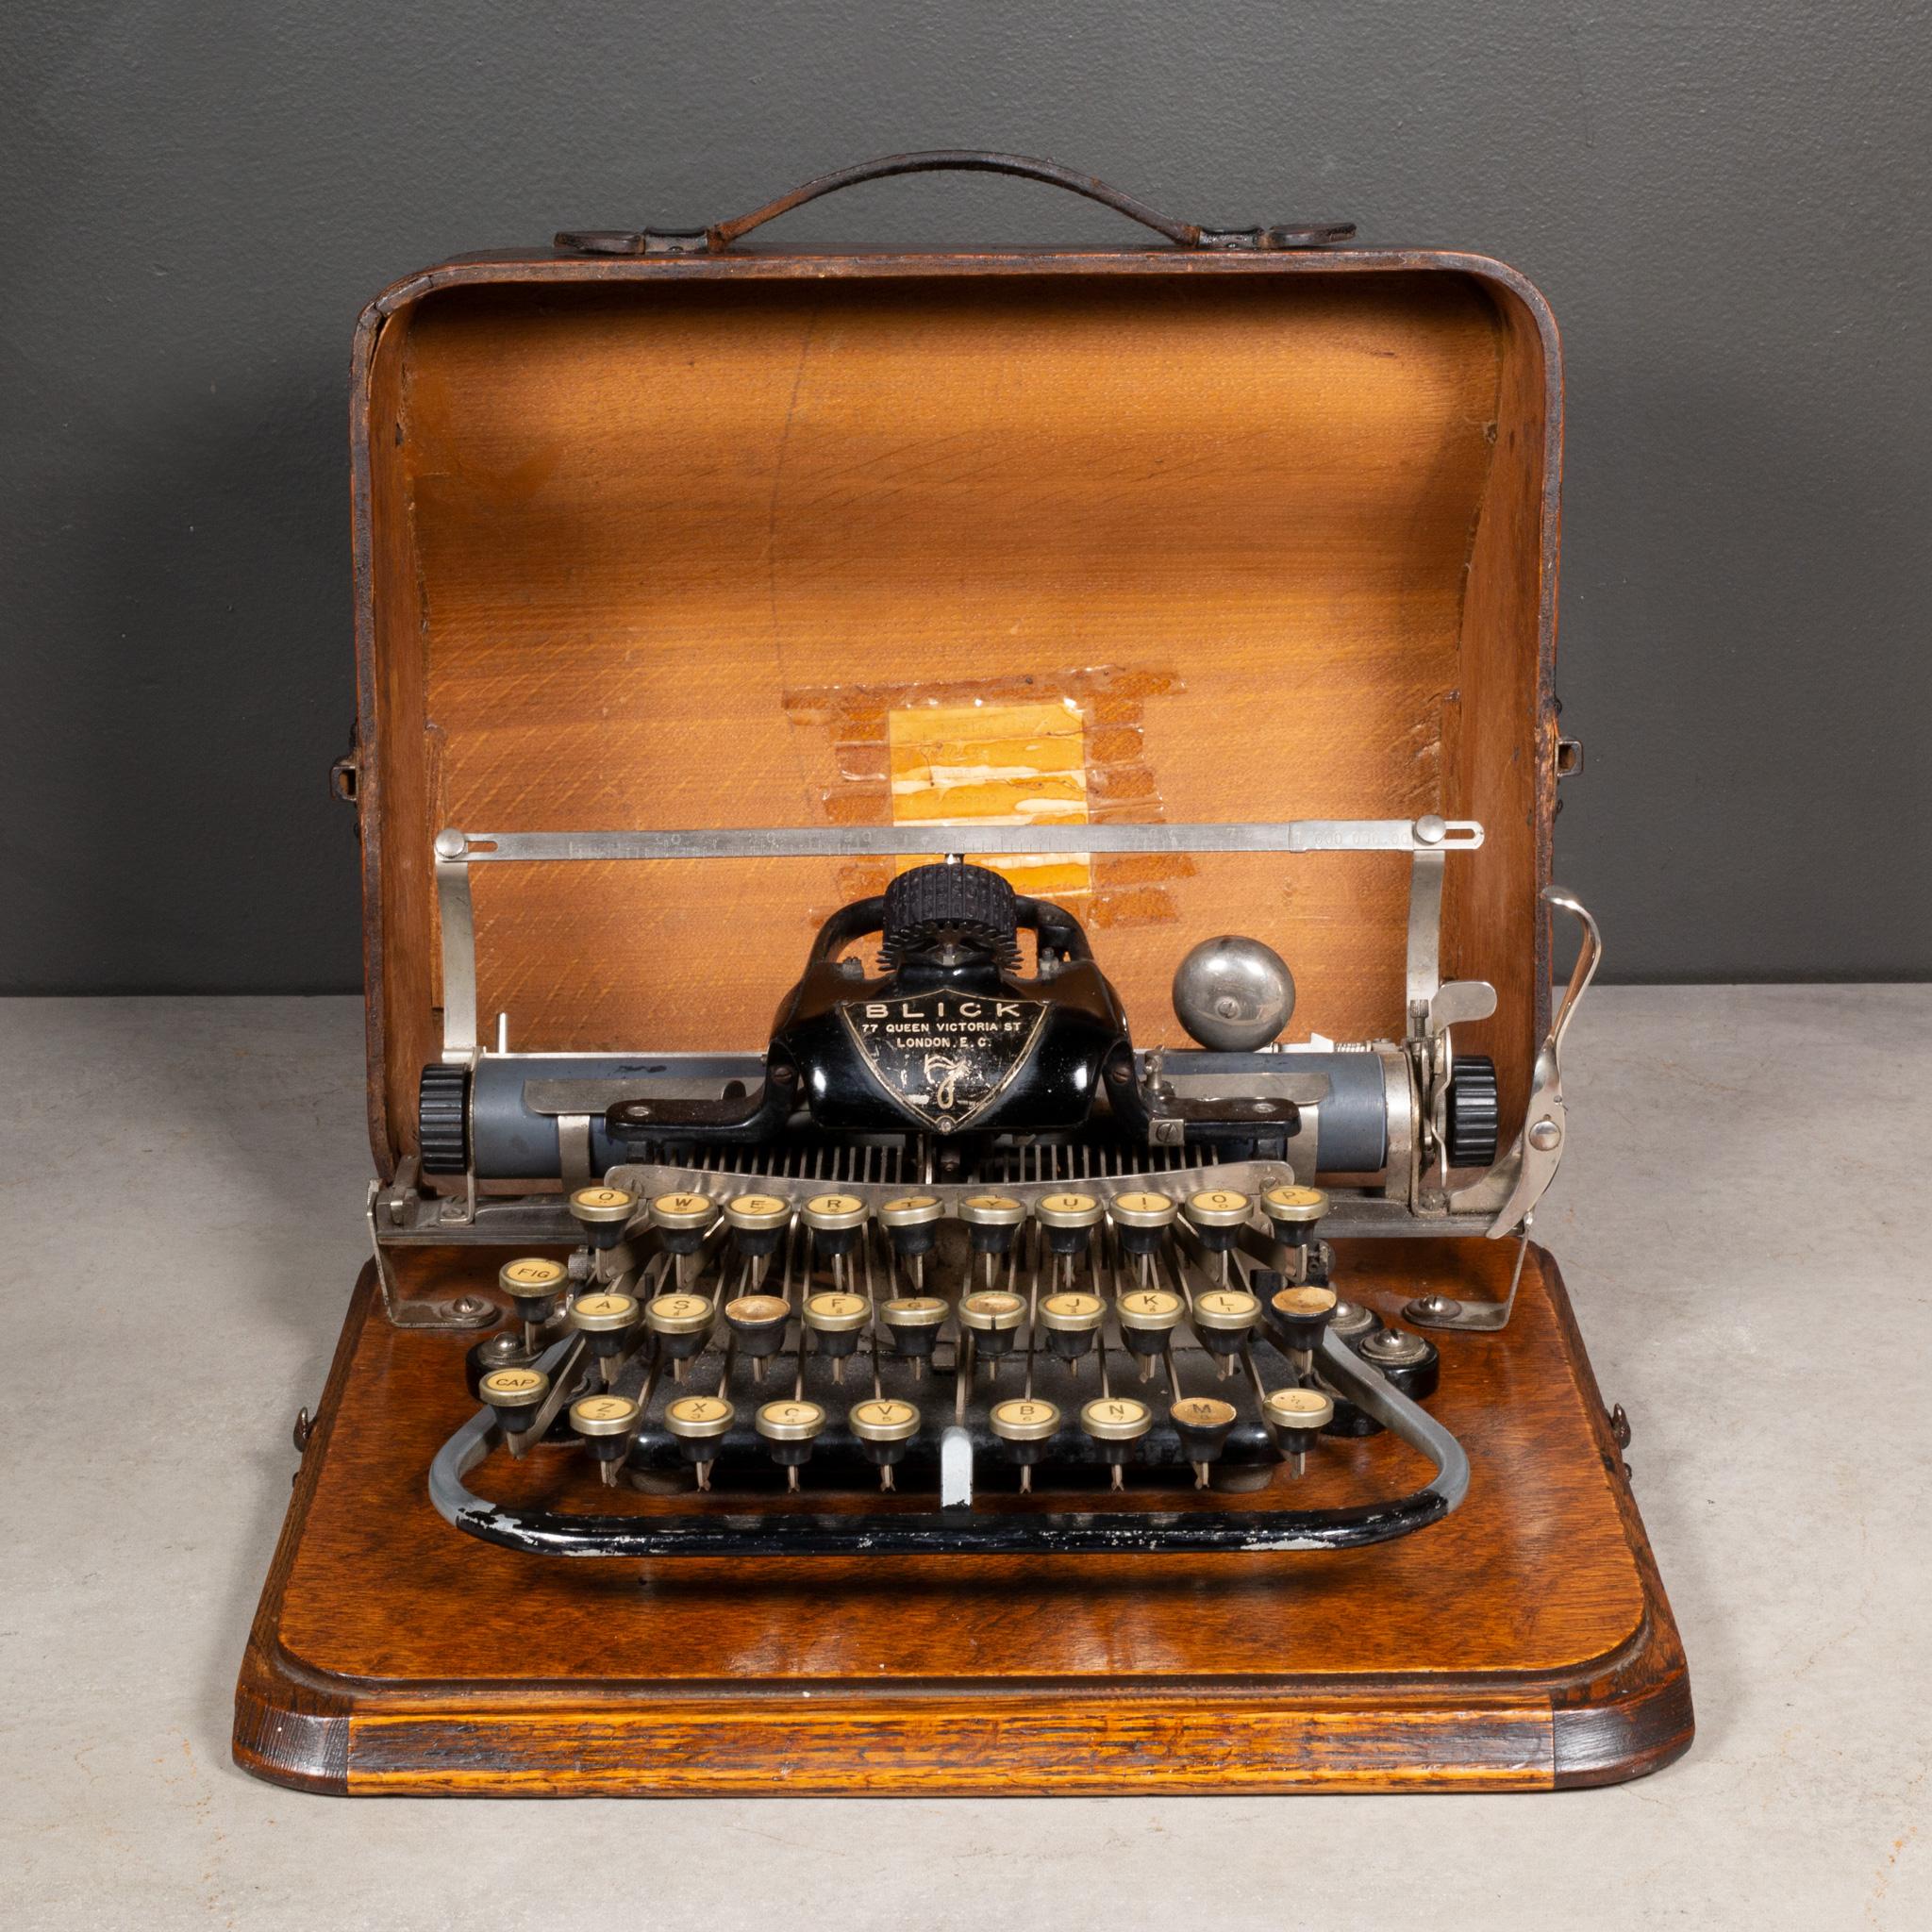 ABOUT

Late 19th c. Blick typewriter #7 with original wooden case and mounted on a wooden base. The number 7 model was manufactured from 1897 to 1916 by the Blickensderfer Typewriter Company based in Stamford, Connecticut, USA. This particular